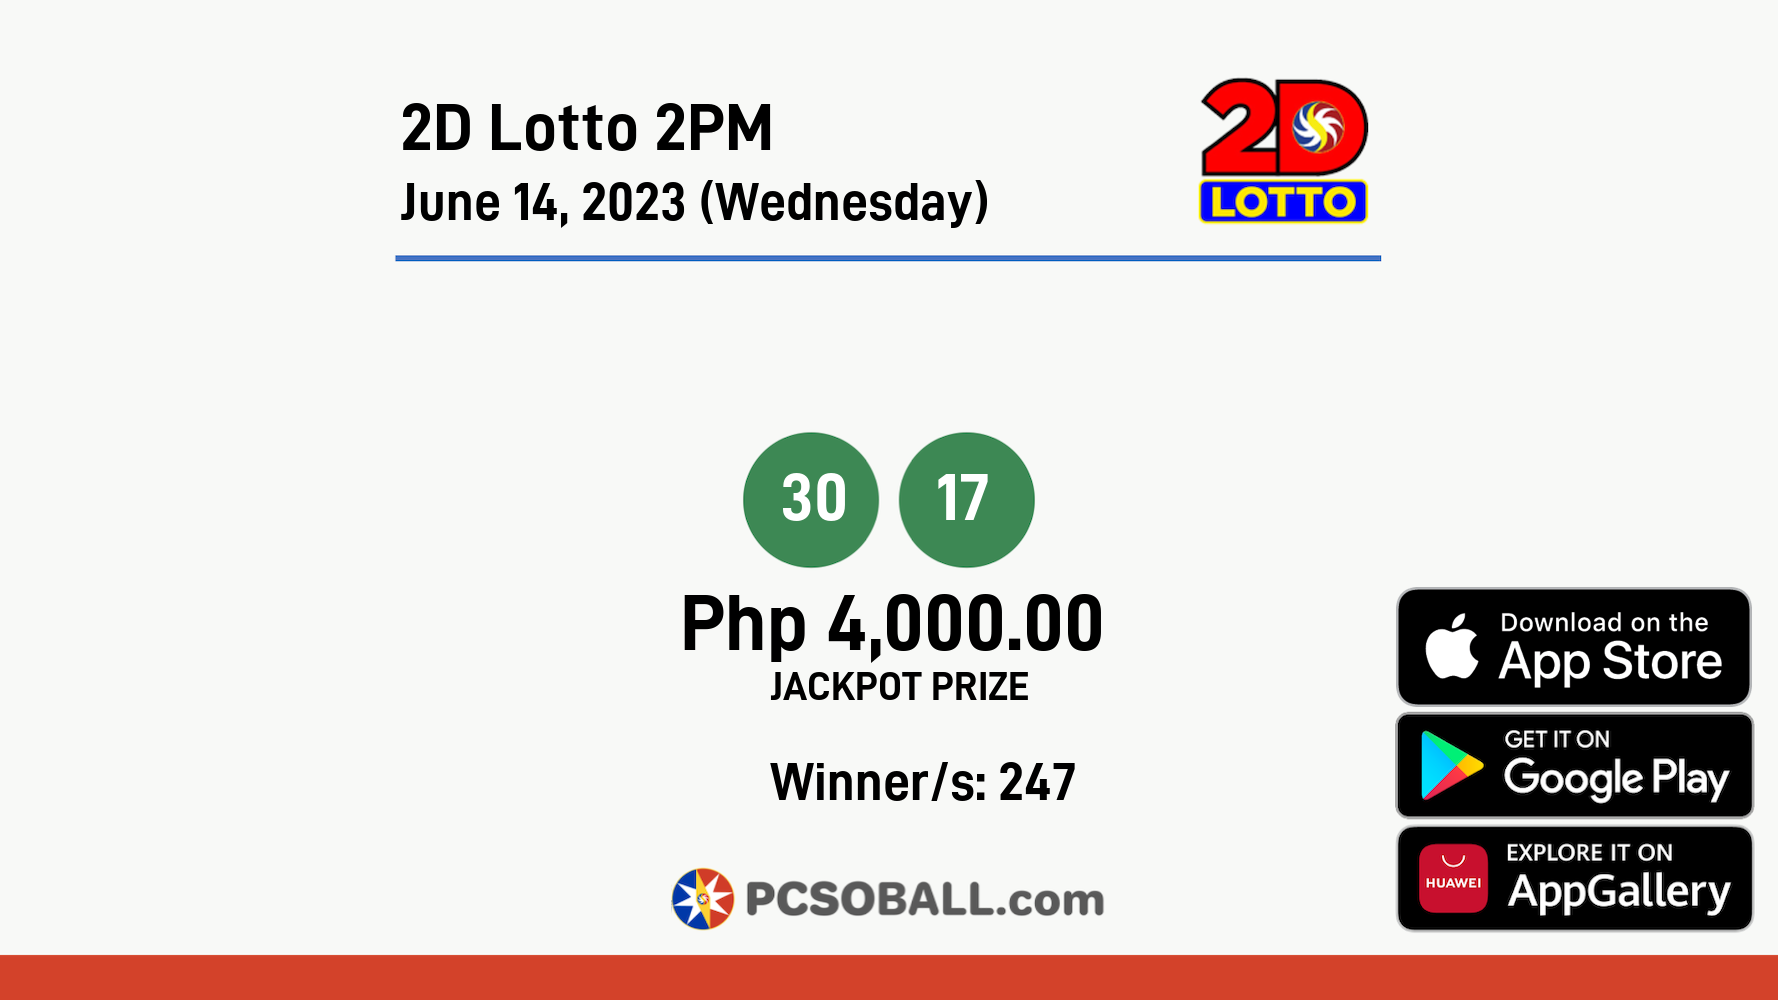 2D Lotto 2PM June 14, 2023 (Wednesday) Result